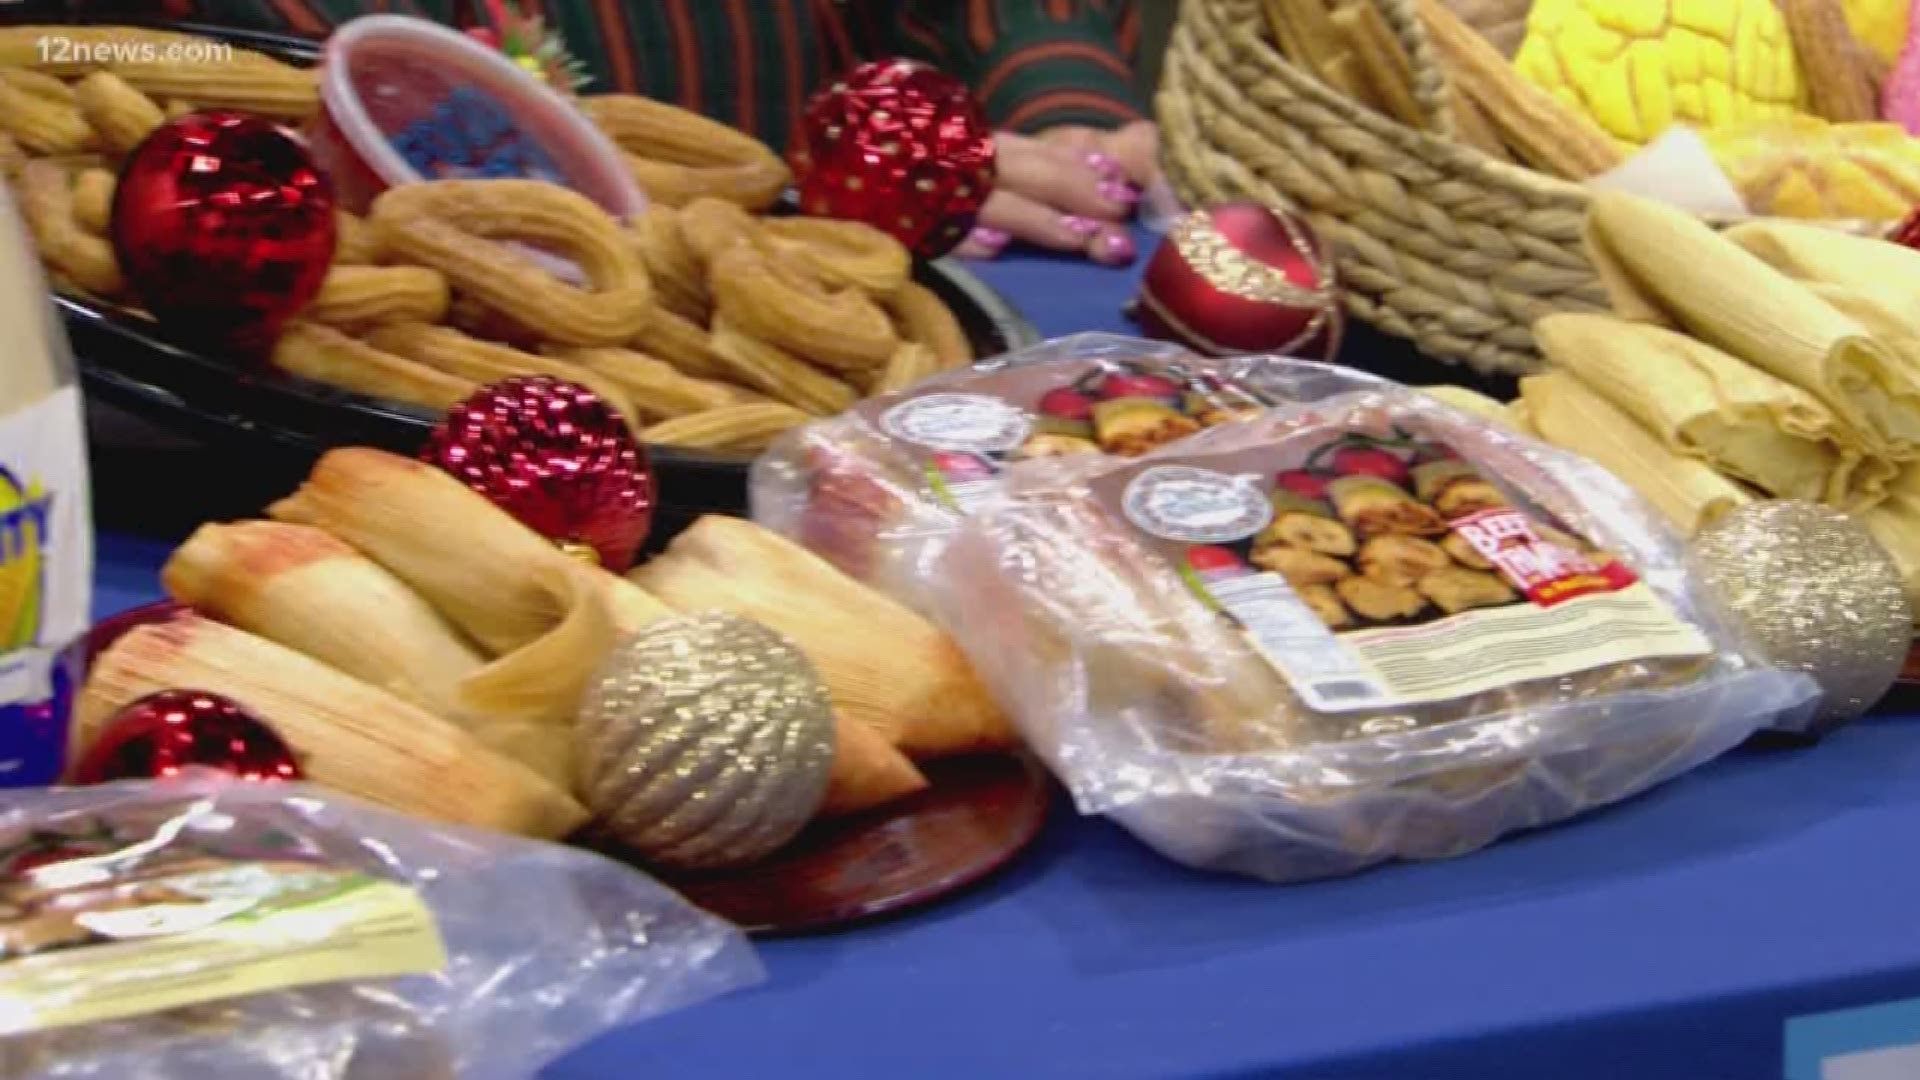 The 17th Annual Food City Tamale Festival will feature over 75 vendors. Vanessa Ramirez and Emma Jade get the details.